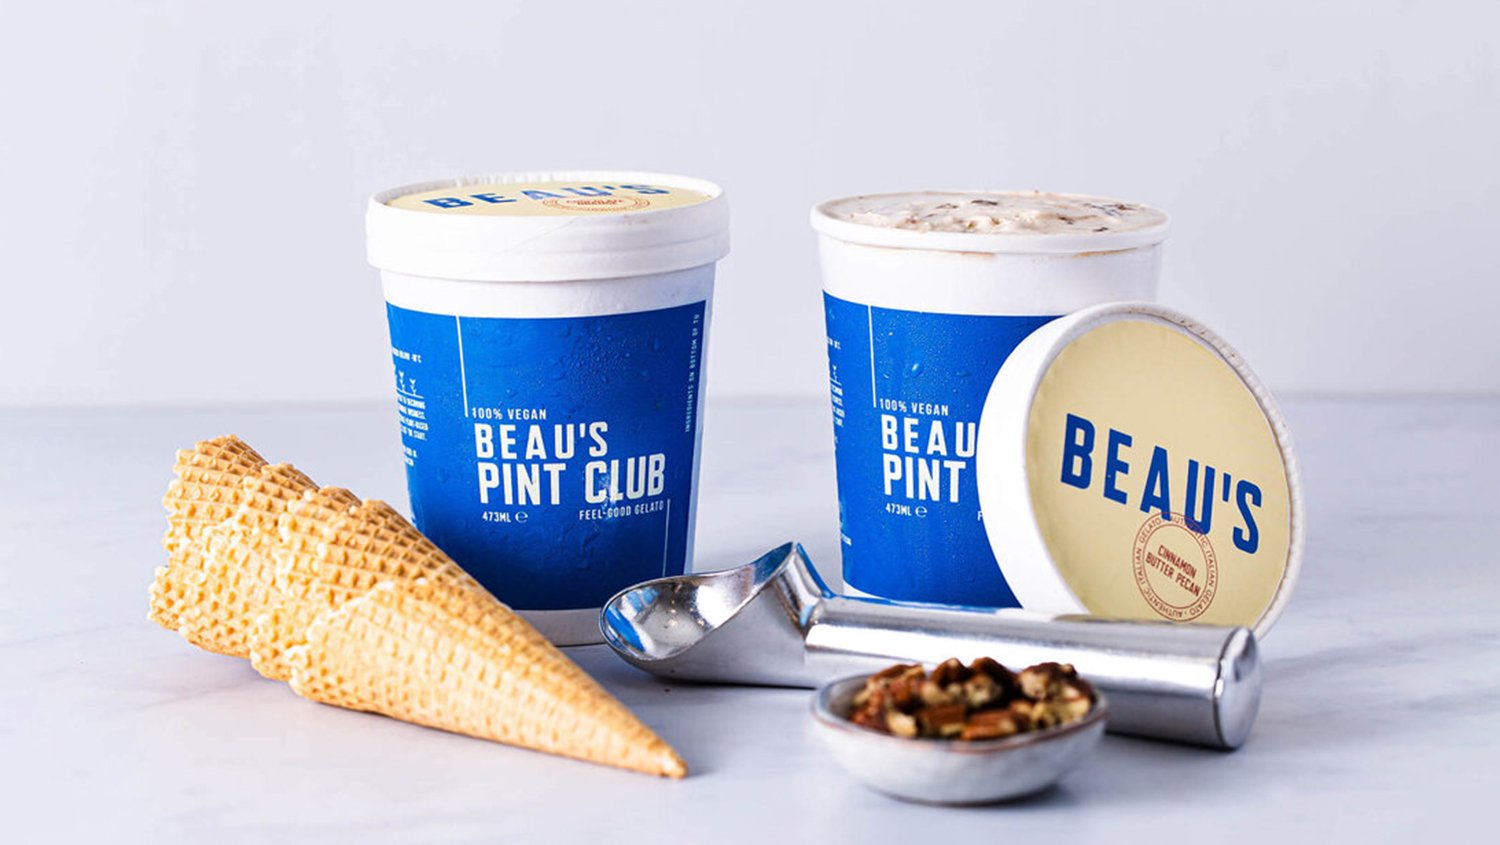 UK's First Vegan Ice Cream Subscription Service Lands Over $500,000 In Latest Investment Round